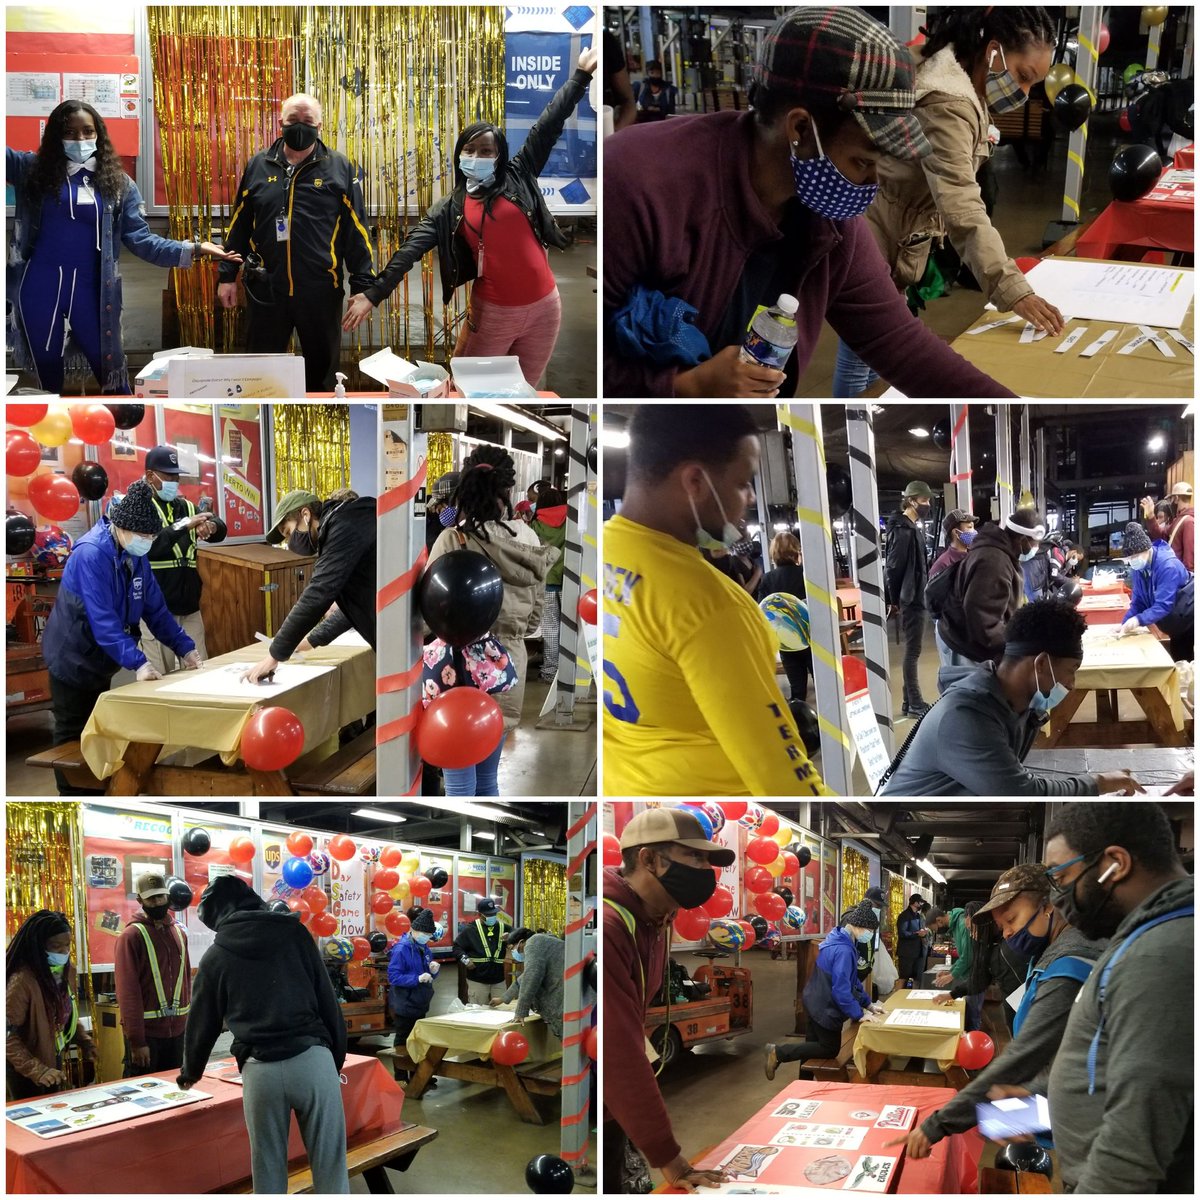 PHL Day Sort had a blast at the safety fair!!! Thank you to all who helped and participated!!! #keys2mysafety #Teamphlsnaps @RobertCapone17 @Scottfranklin01